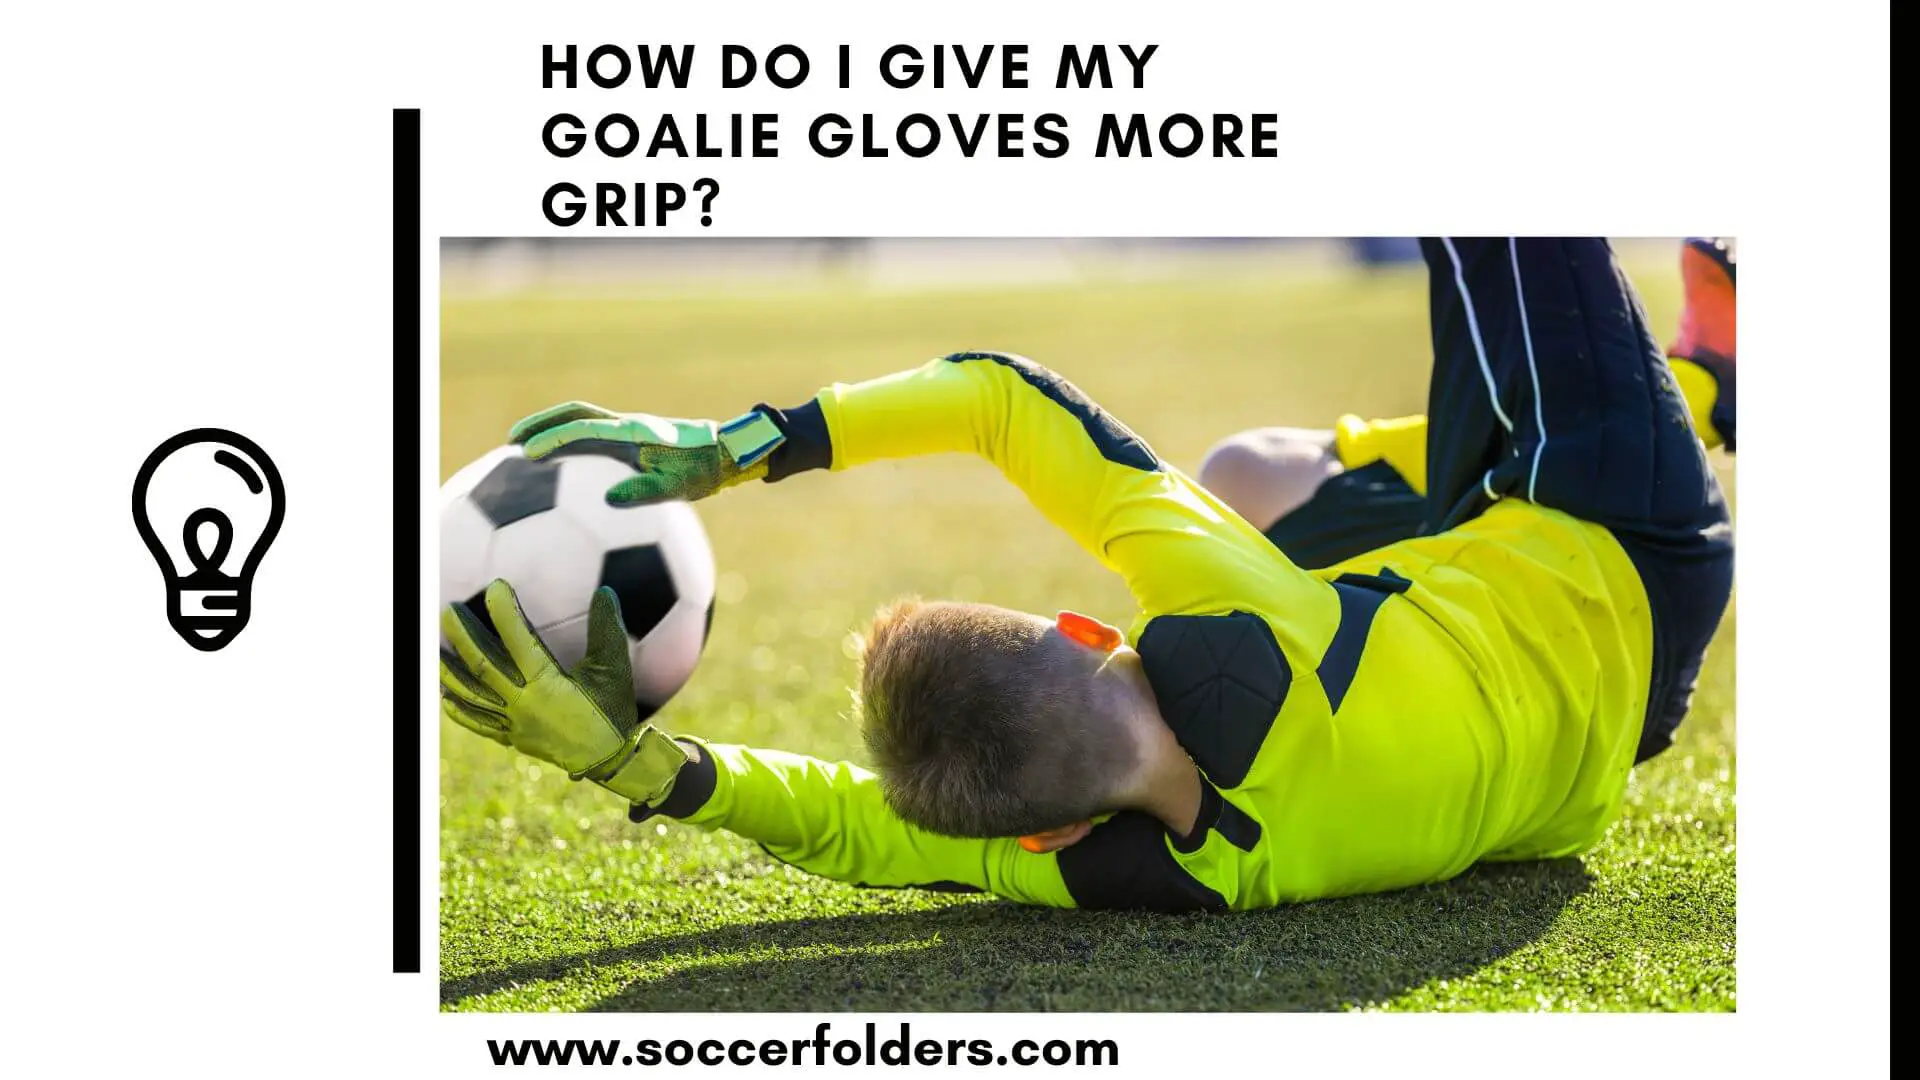 How do I give my goalie gloves more grip - Featured Image